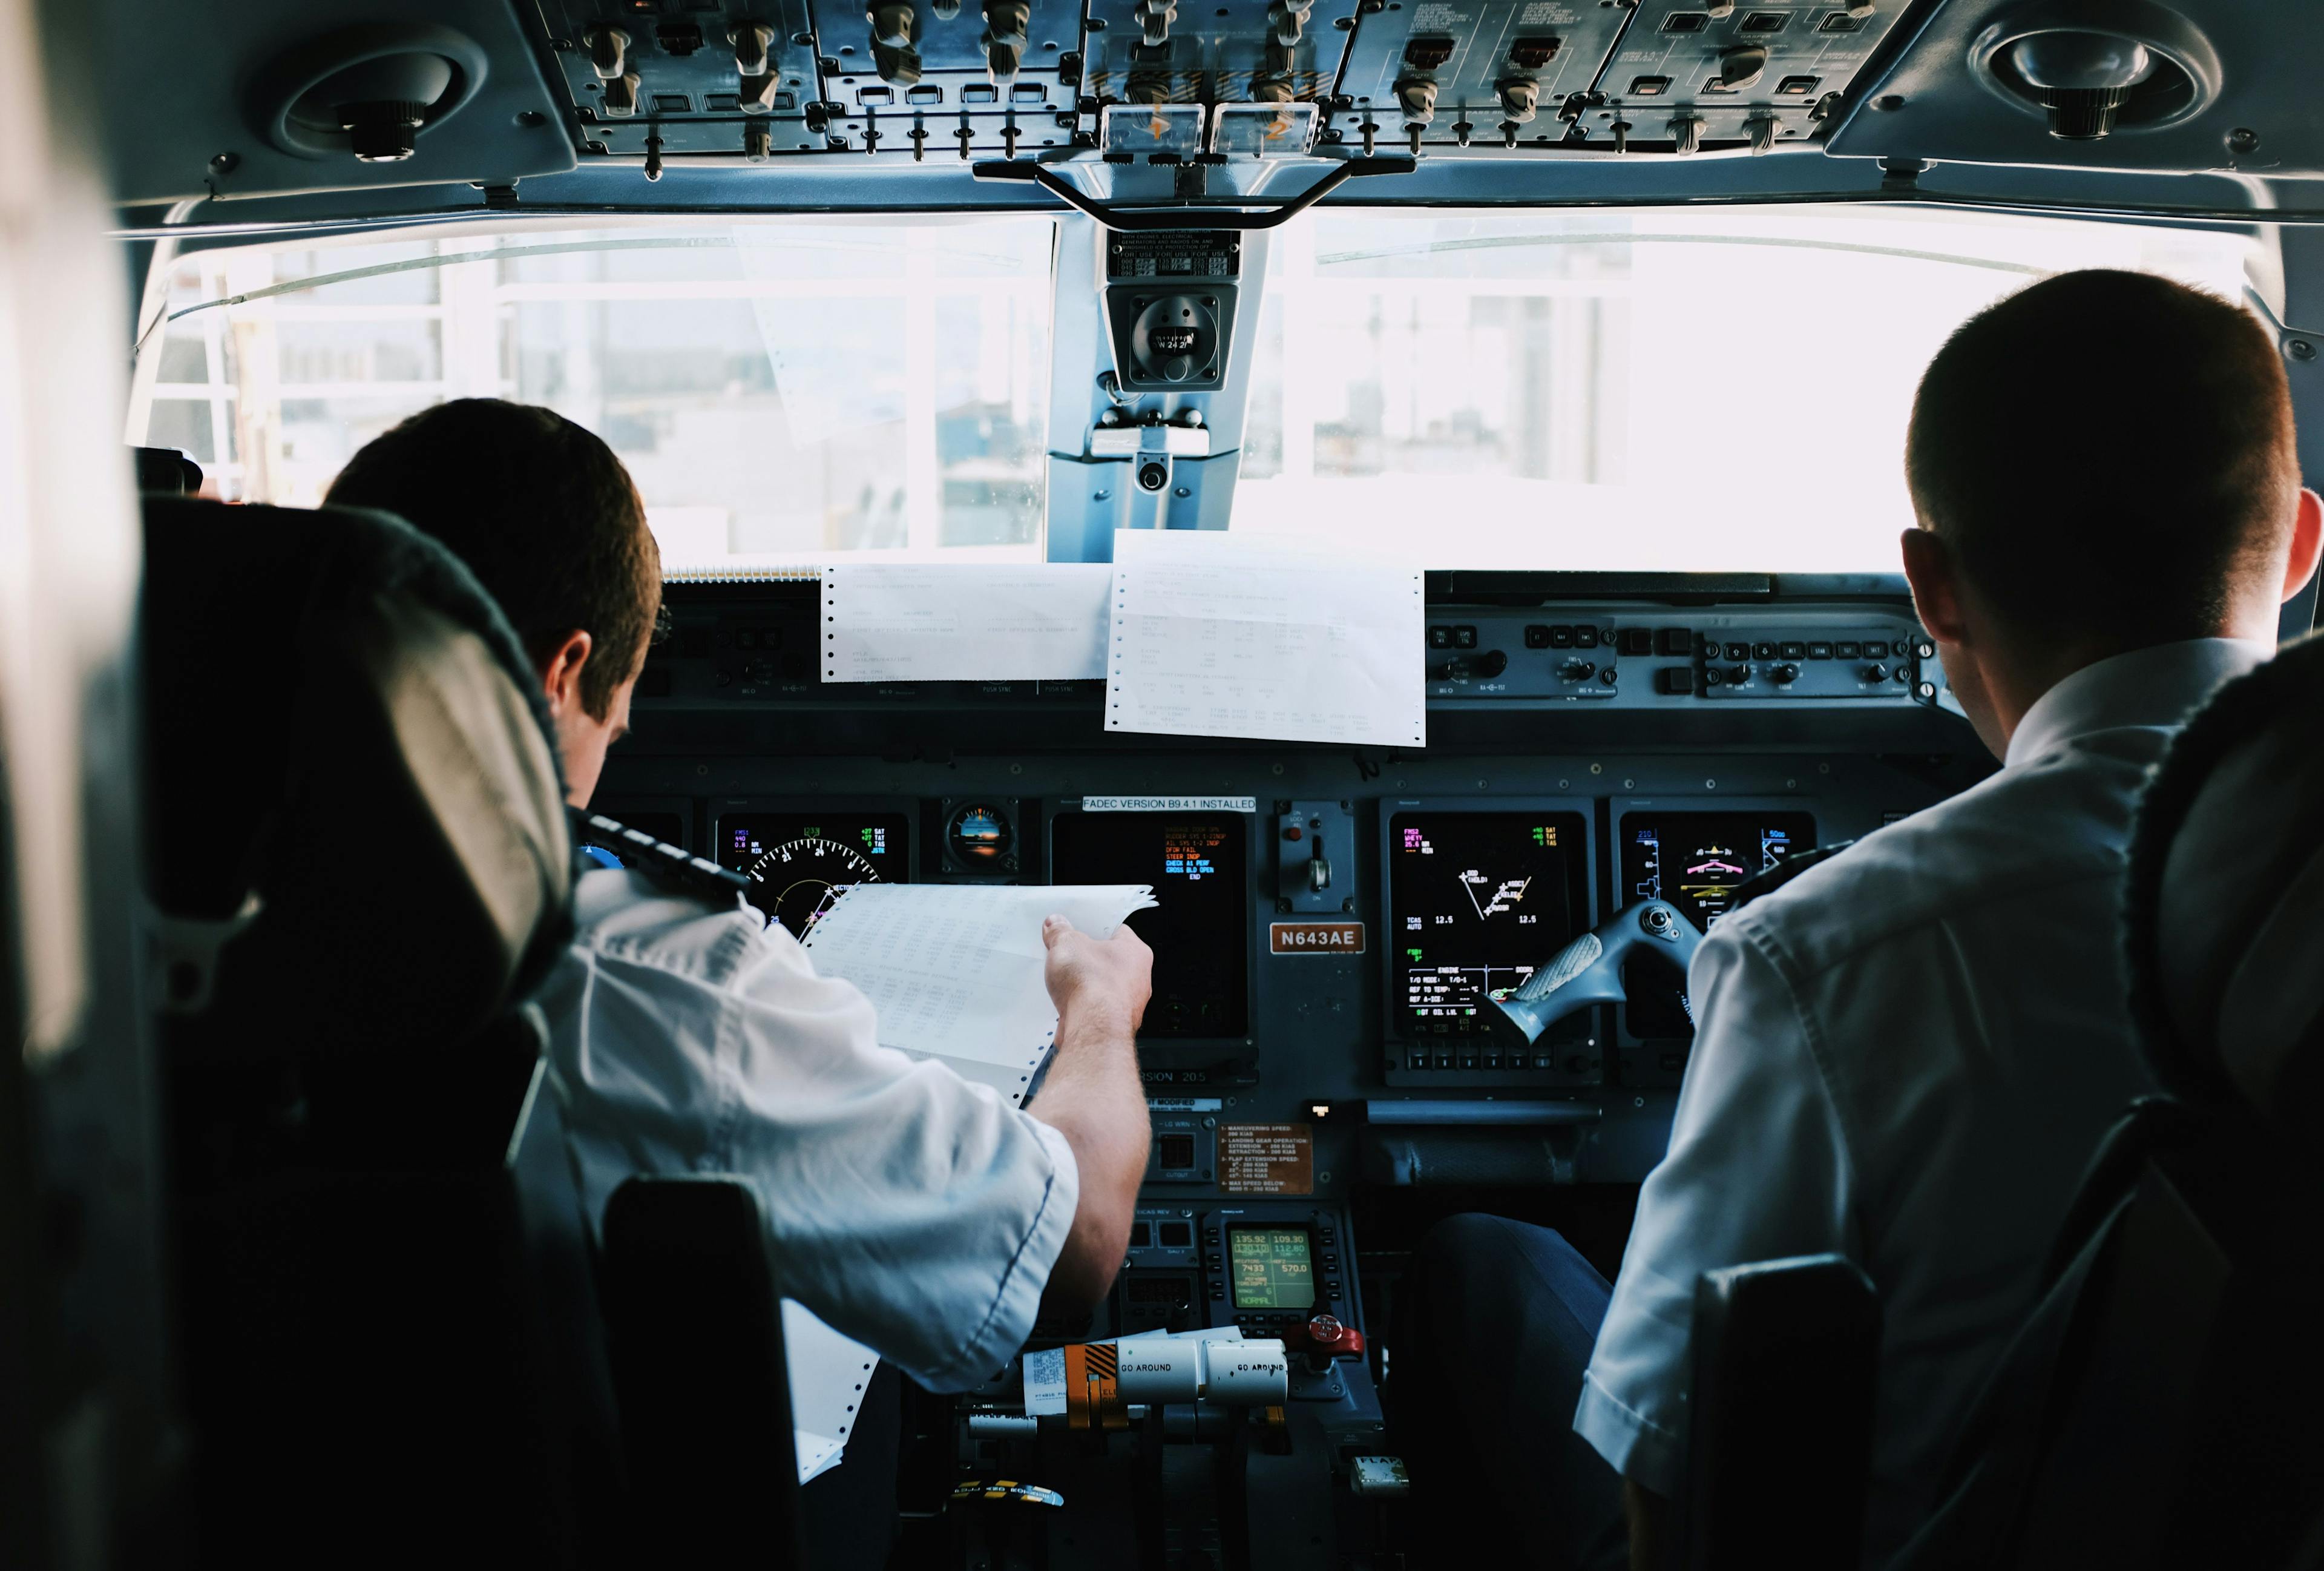 Luxair recruits pilots for training